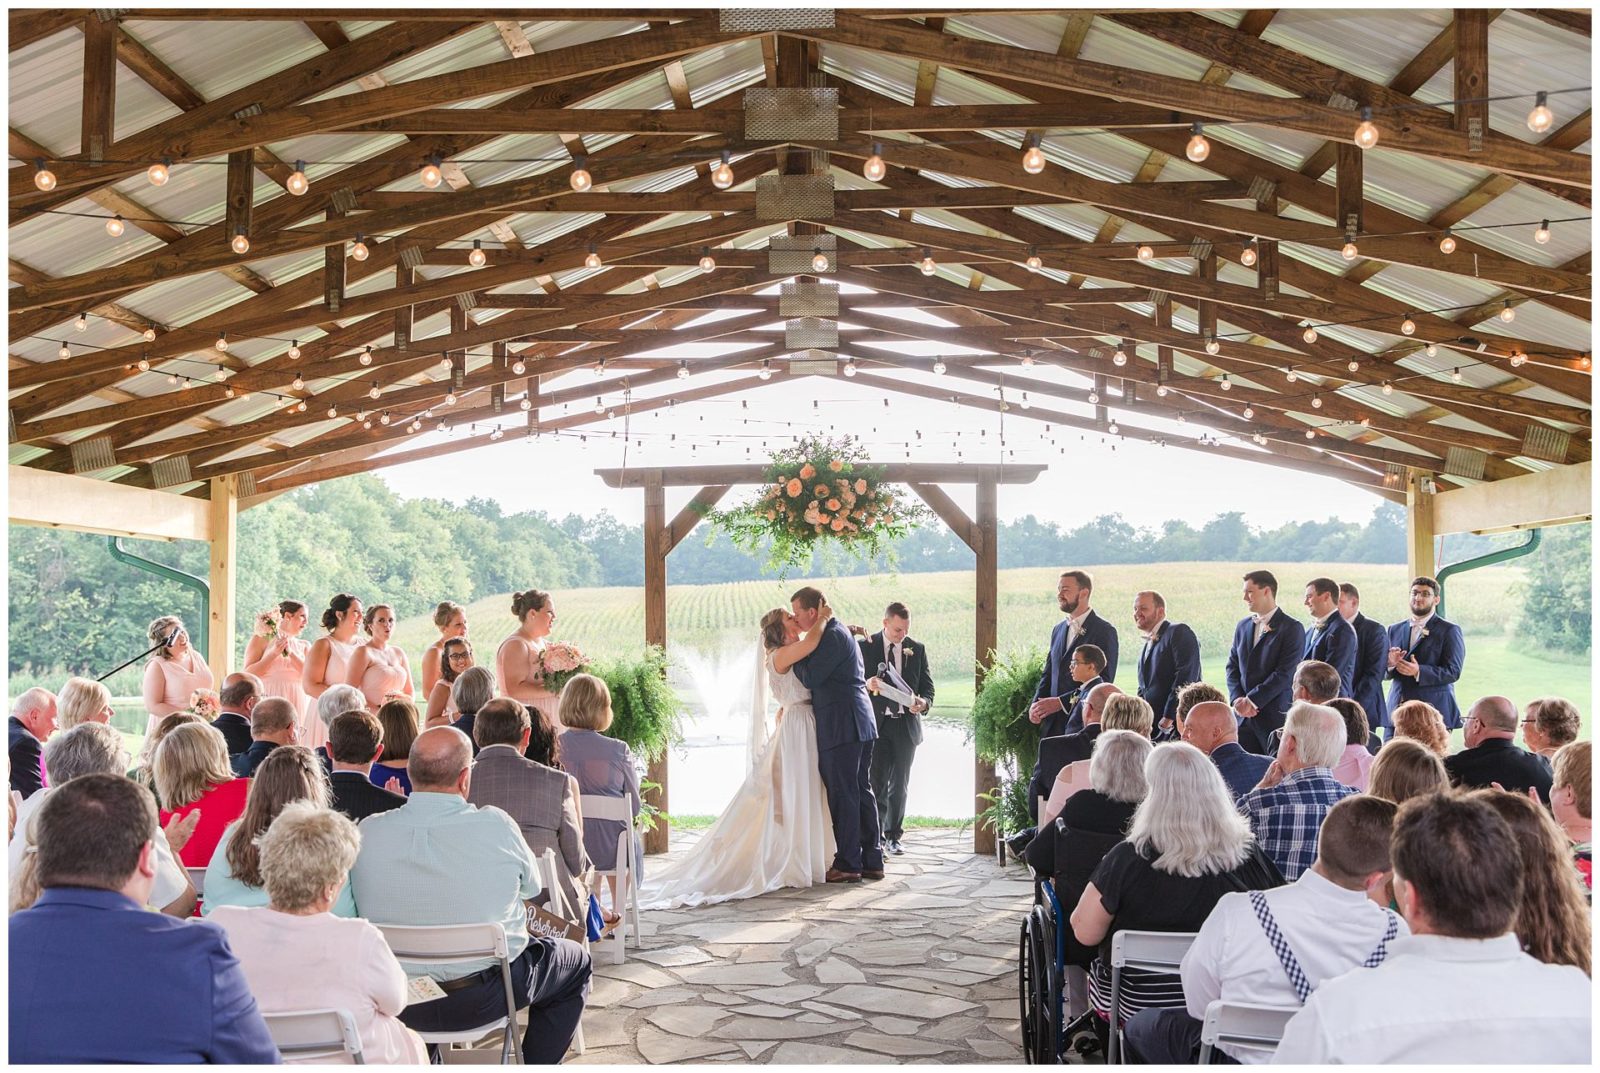 Wedding Ceremony Photos at the Barn at McCall Springs in Lawrenceburg, Kentucky.